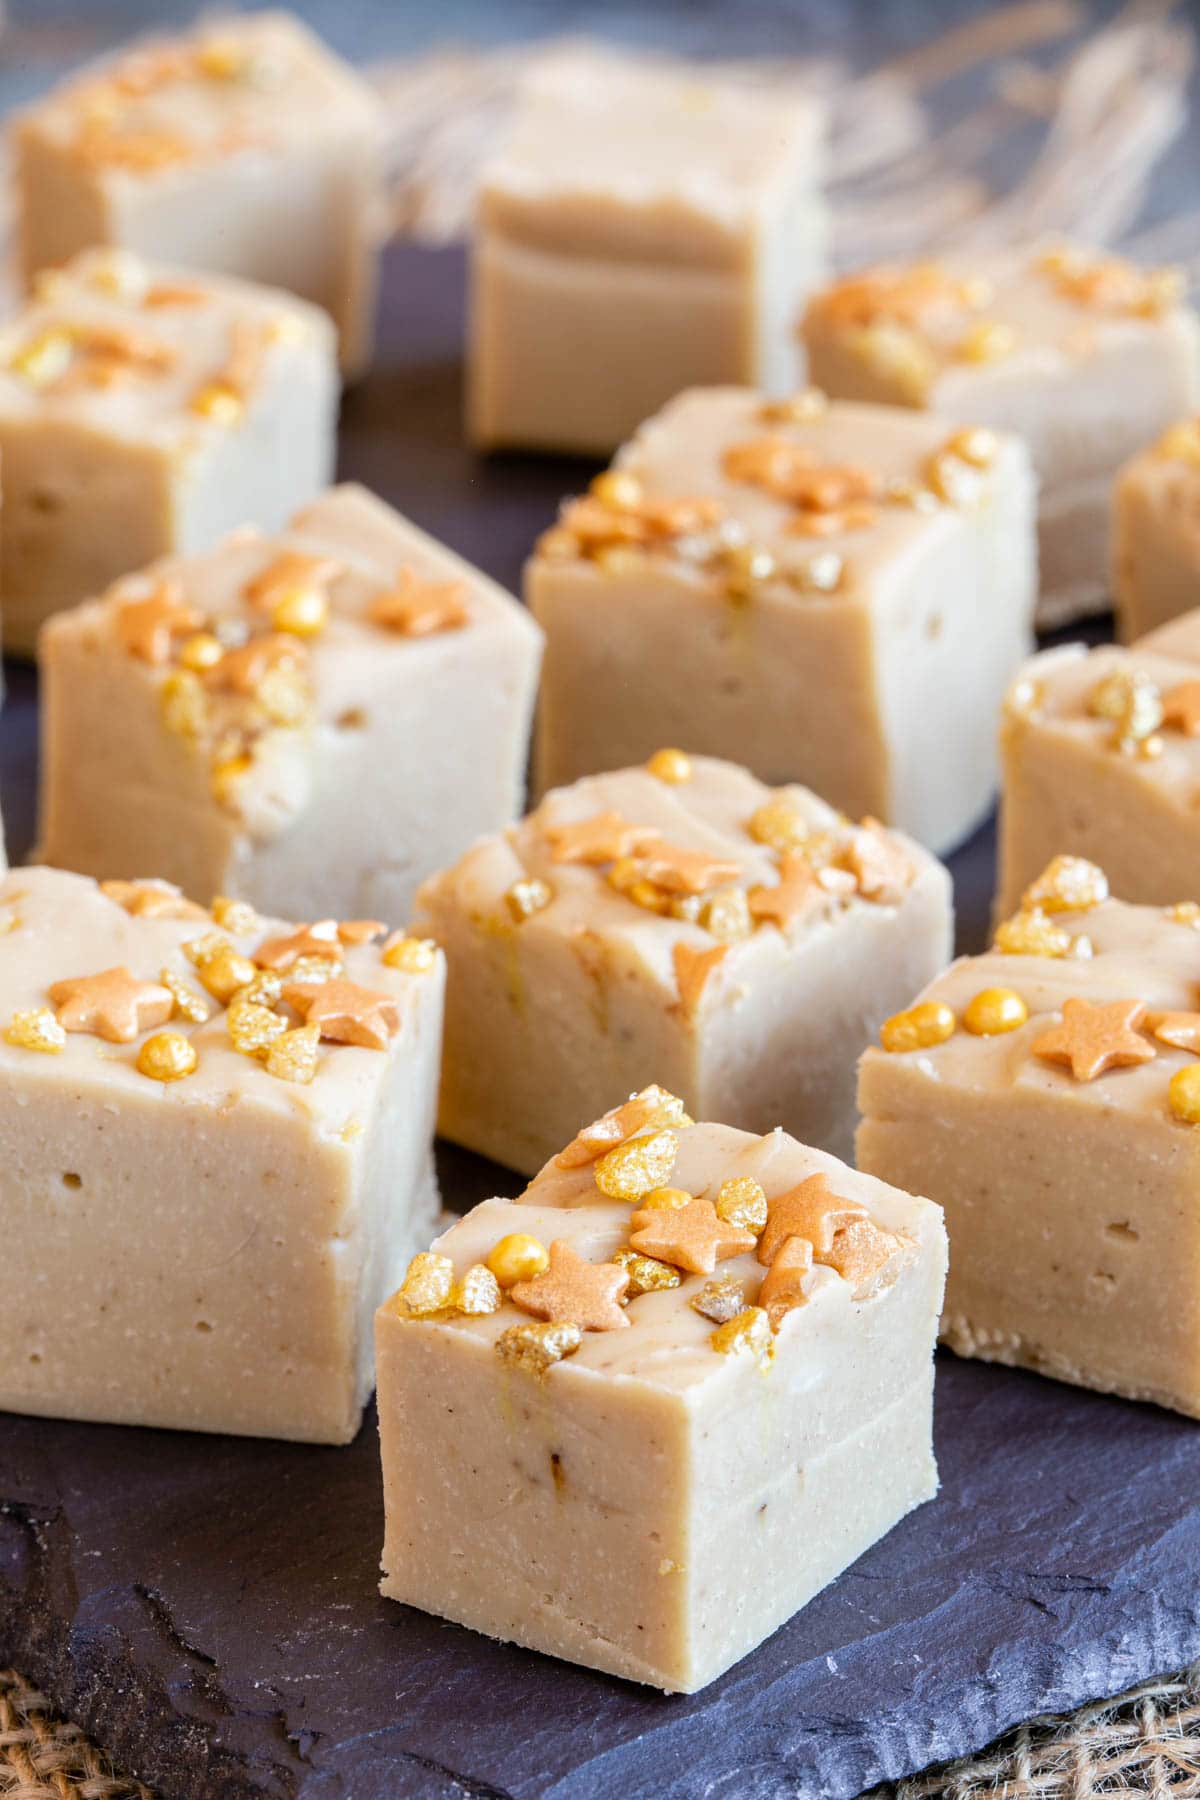 Pale, creamy and delicious, these gorgeous little cubes of coffee fudge look irresistable with a topping of golden cake sprinkles.